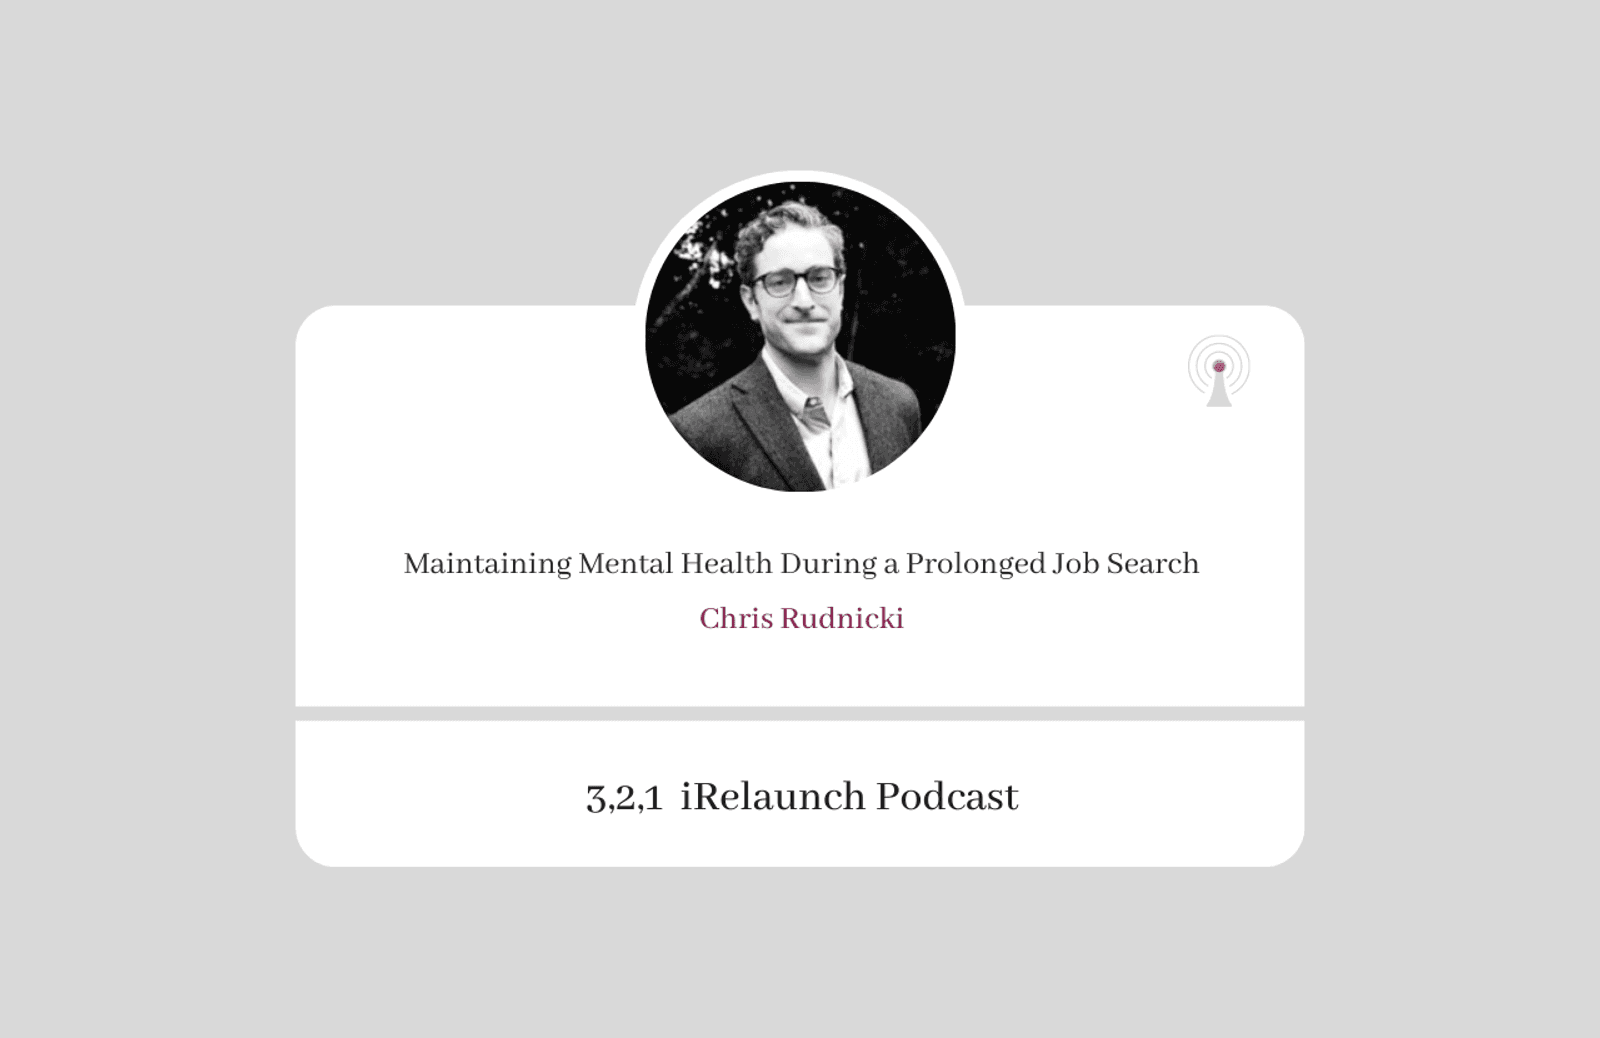 3, 2, 1 iRelaunch Podcast Thumbnail for Episode #110 with Chris Rudnicki's headshot. The episode's title is: "Maintaining Mental Health
During a Prolonged Job Search."